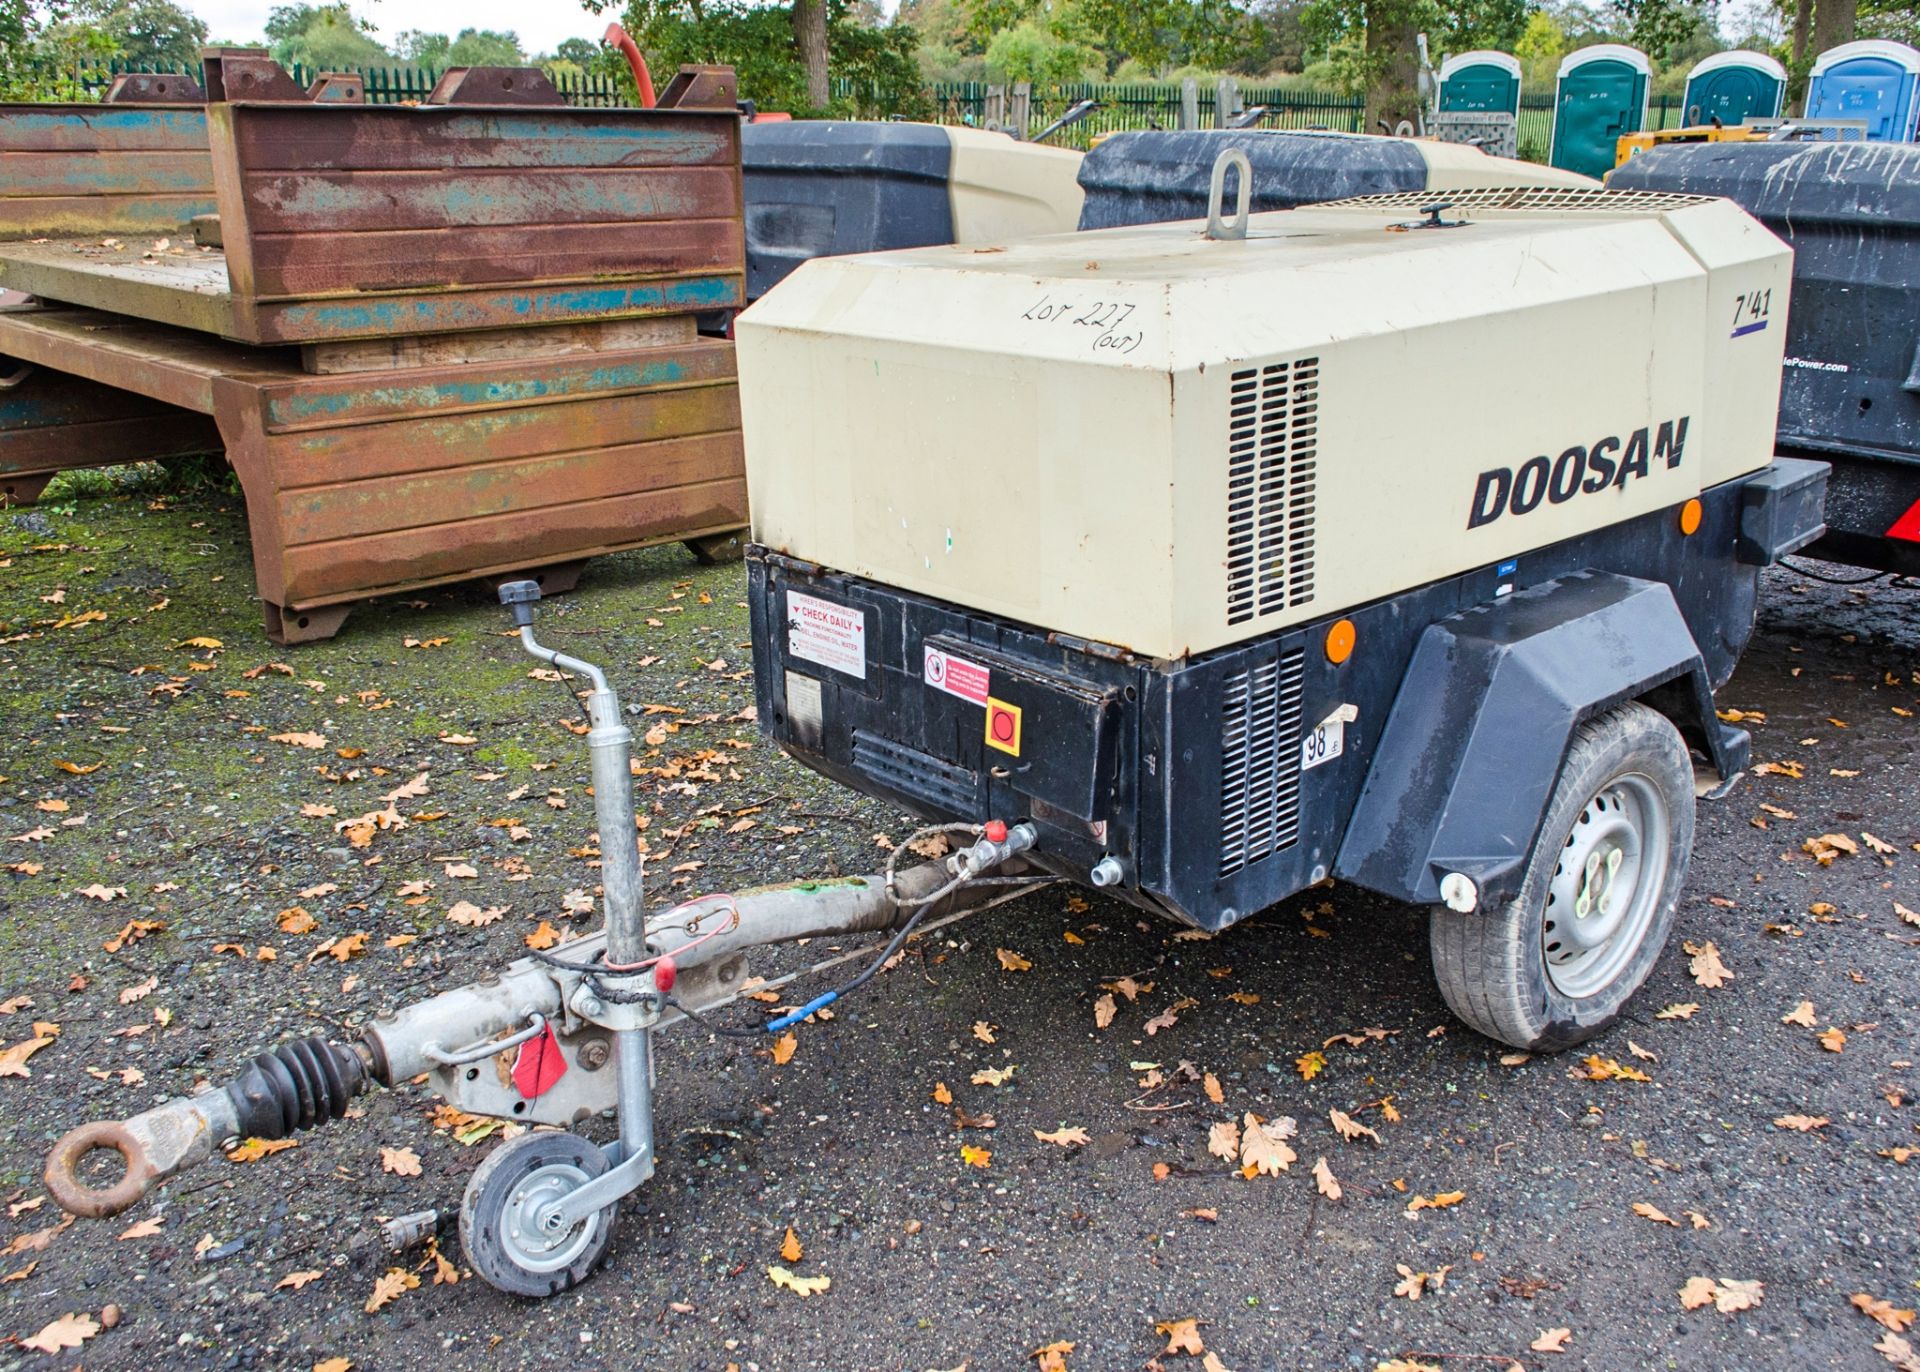 Doosan 741 diesel driven fast tow mobile air compressor Year: 2016 S/N: 434155 Recorded Hours: